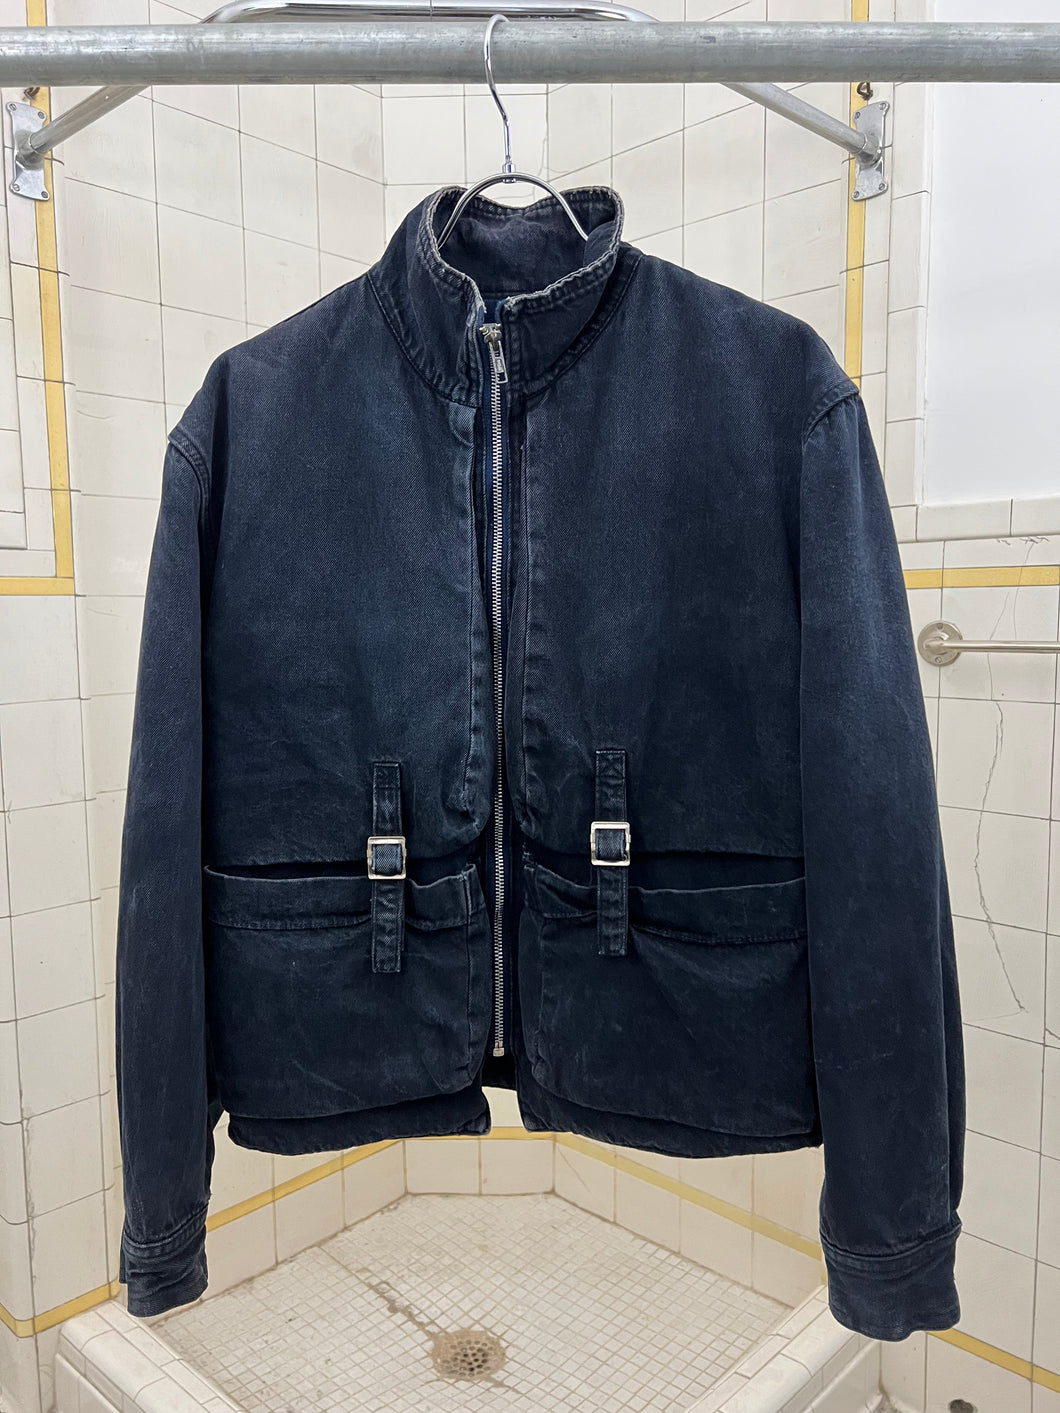 1980s Marithe Francois Girbaud x Complements Denim Jacket with